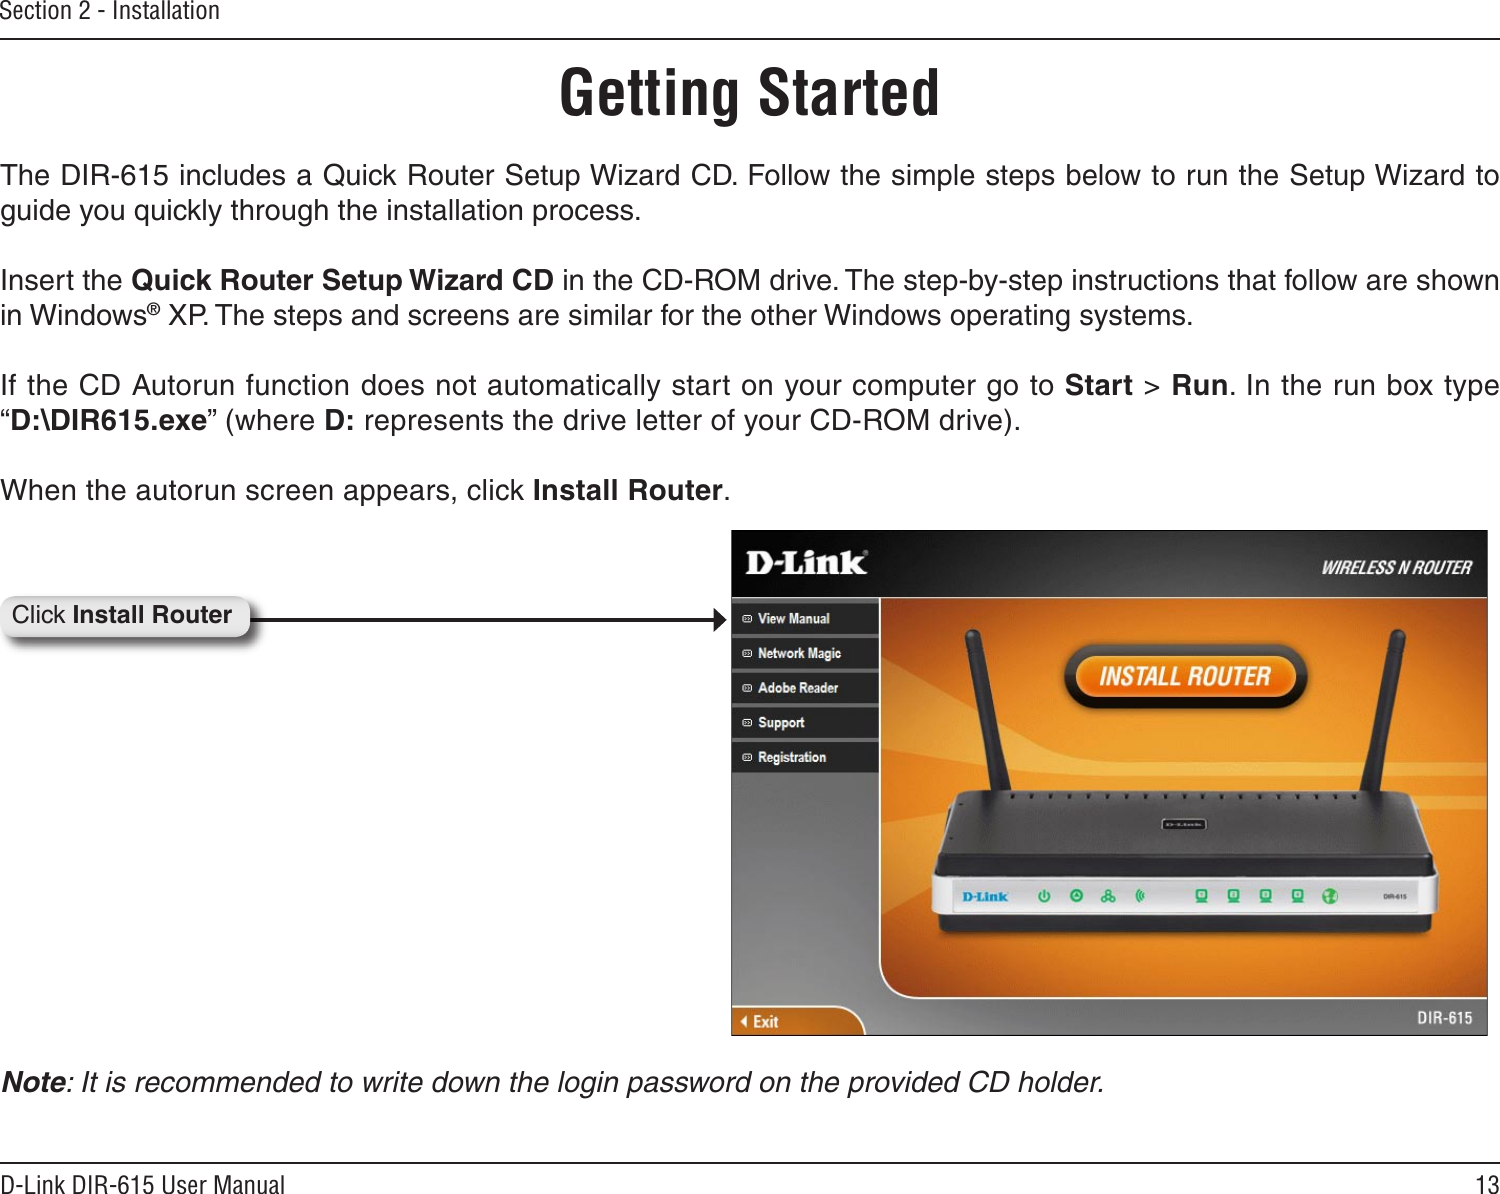 13D-Link DIR-615 User ManualSection 2 - InstallationGetting StartedThe DIR-615 includes a Quick Router Setup Wizard CD. Follow the simple steps below to run the Setup Wizard to guide you quickly through the installation process.Insert the Quick Router Setup Wizard CD in the CD-ROM drive. The step-by-step instructions that follow are shown in Windows® XP. The steps and screens are similar for the other Windows operating systems.If the CD Autorun function does not automatically start on your computer go to Start &gt; Run. In the run box type “D:\DIR615.exe” (where D: represents the drive letter of your CD-ROM drive).When the autorun screen appears, click Install Router.Click Install RouterNote: It is recommended to write down the login password on the provided CD holder.